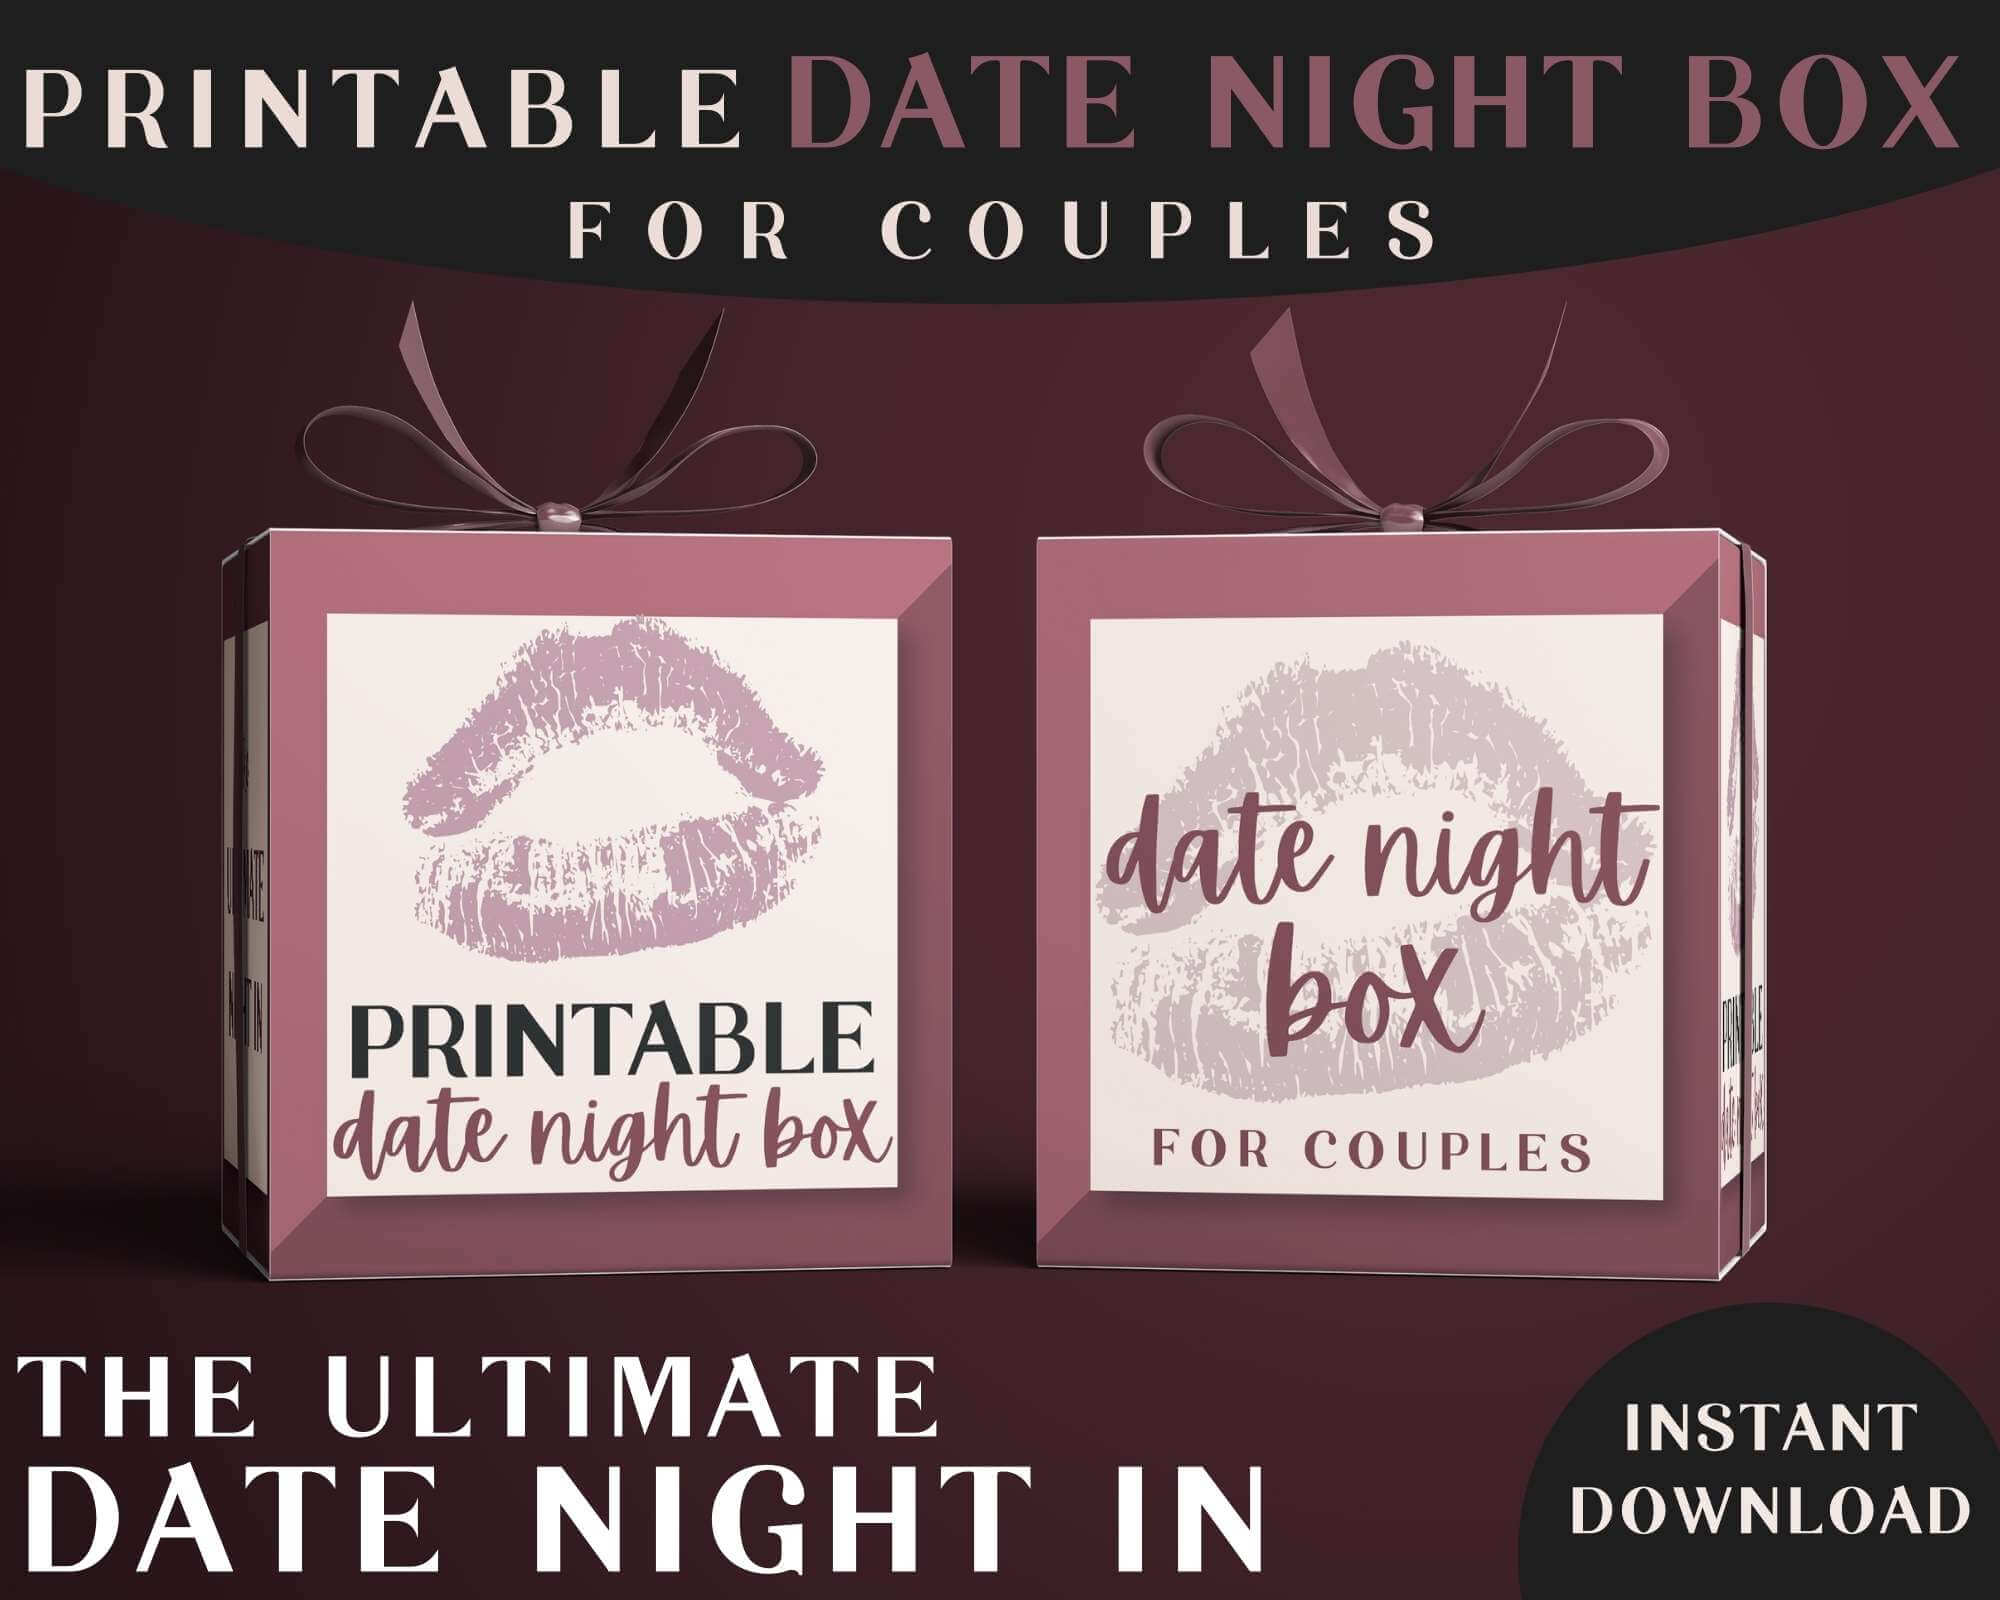 Date Night Box for Couples